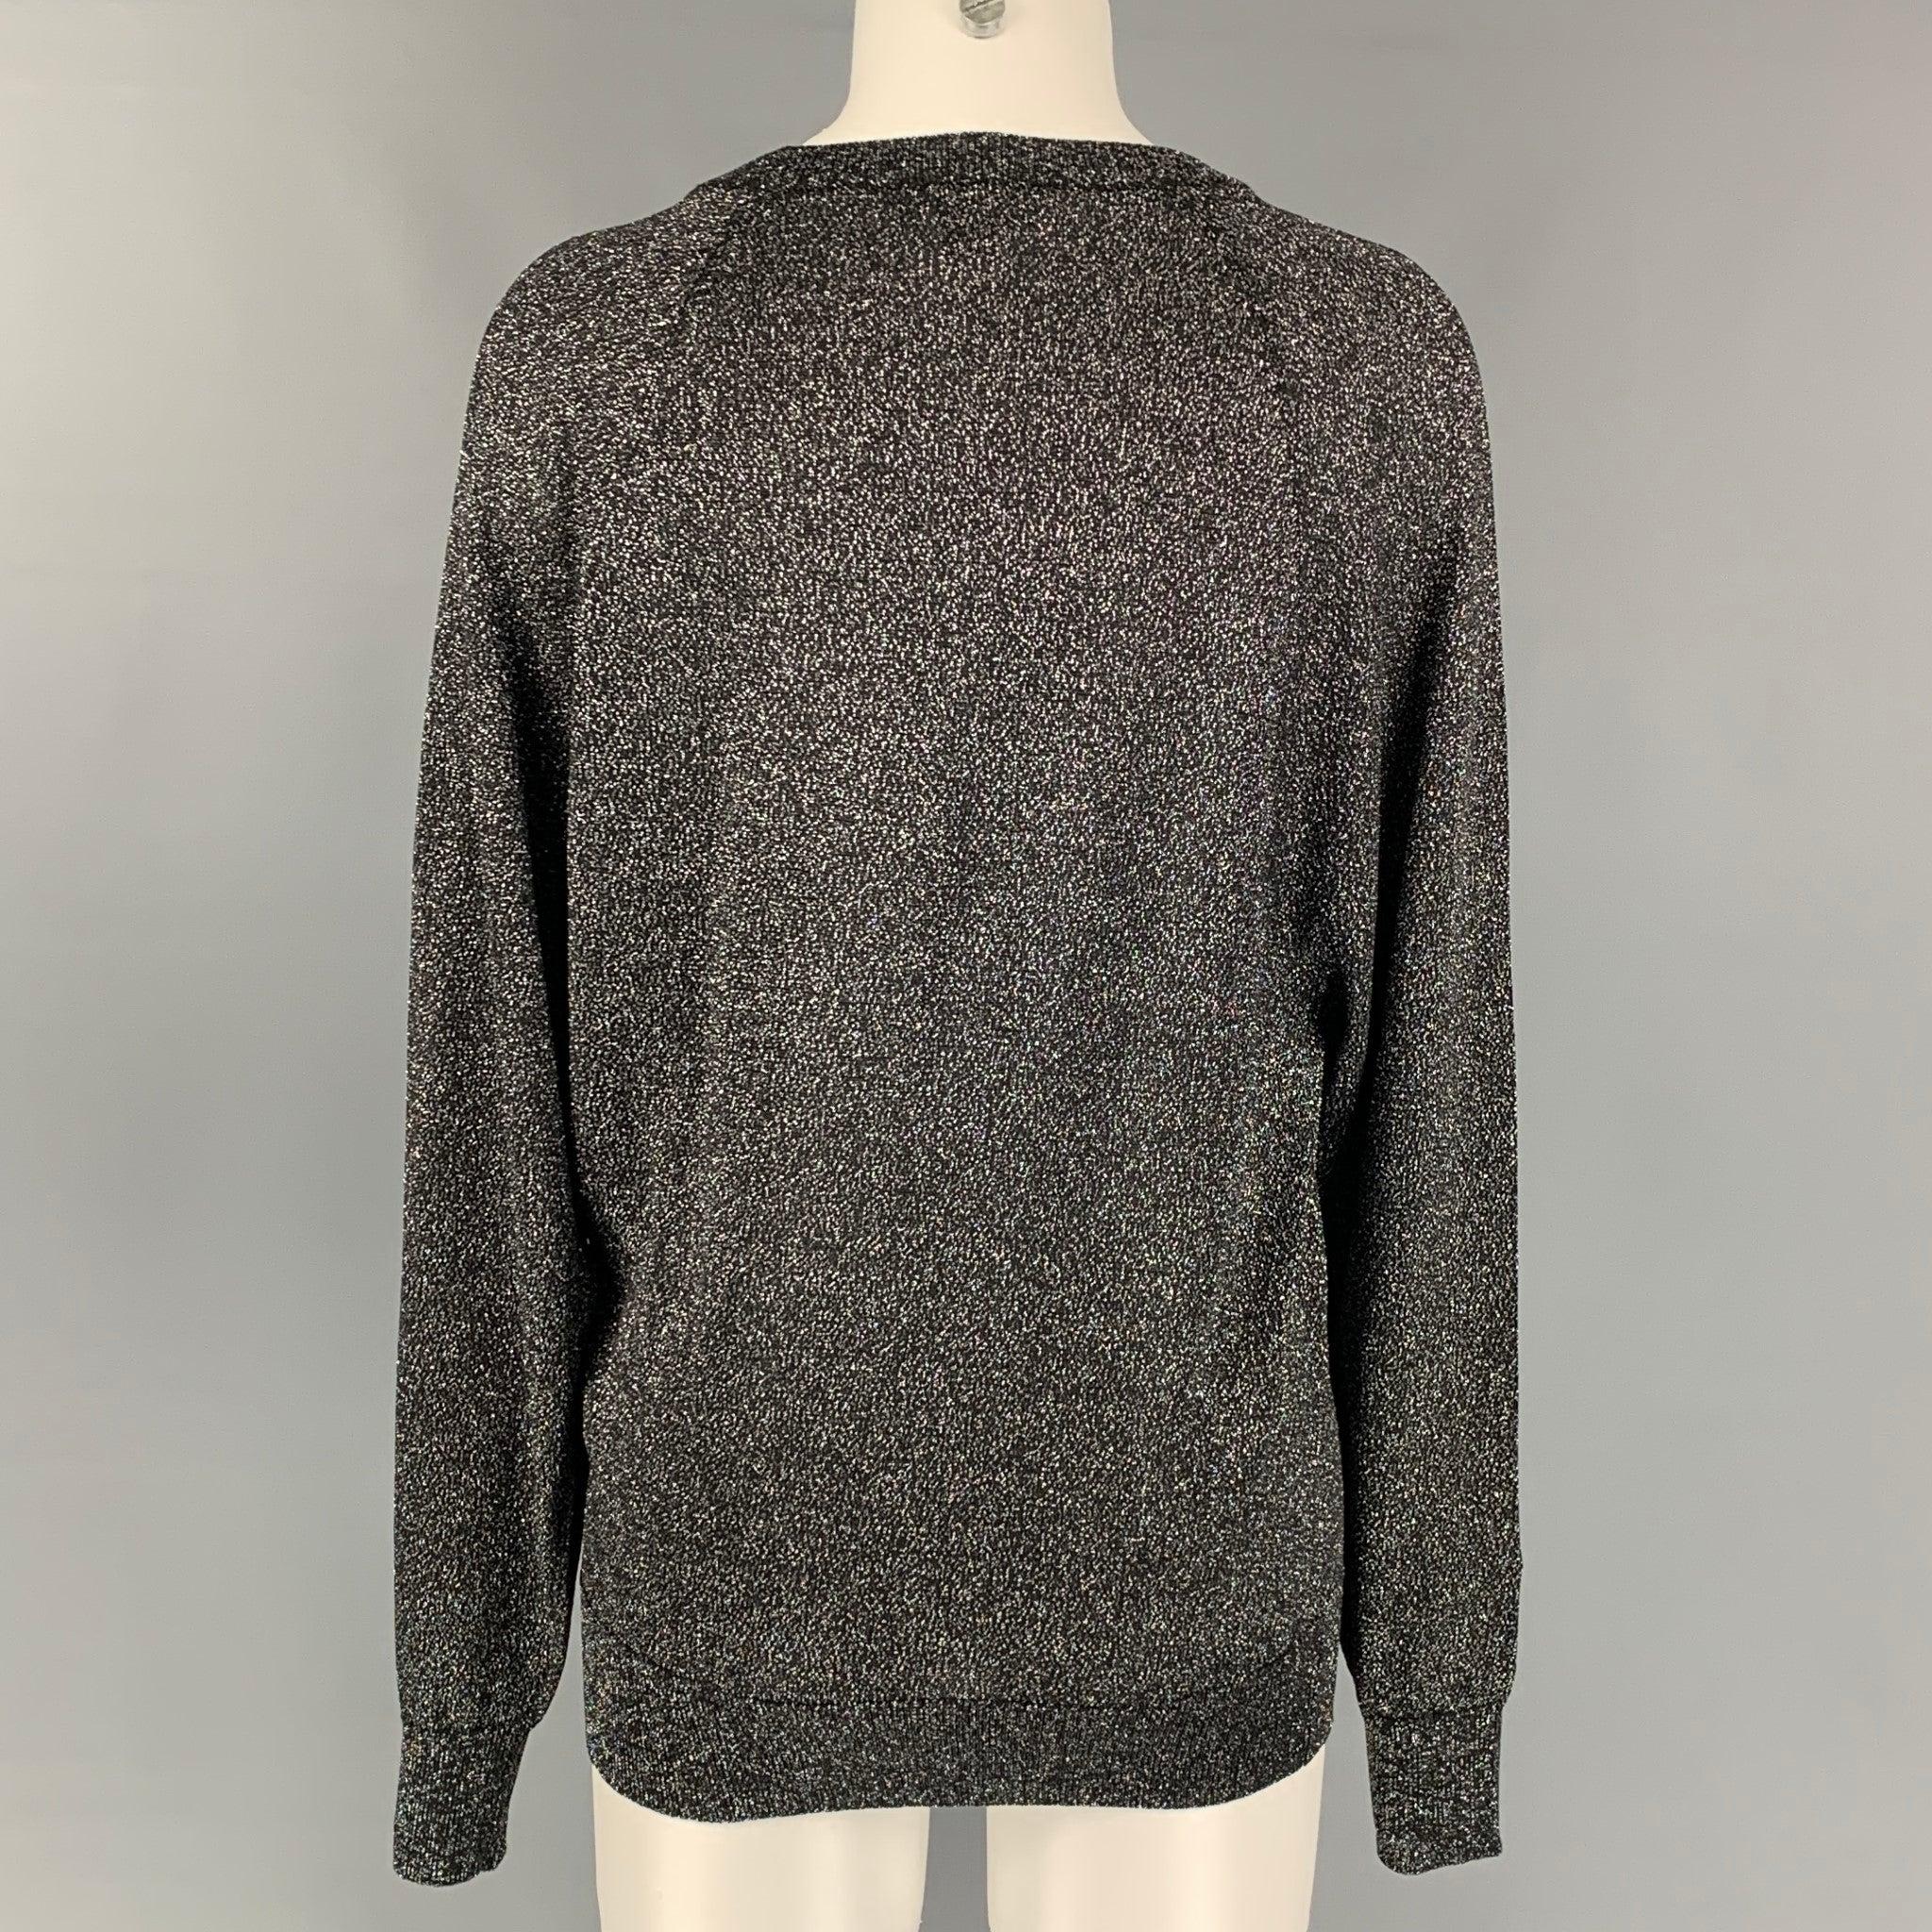 Men's MICHAEL KORS COLLECTION Size XS Silver Metallic Acetate Blend Crew-Neck Pullover For Sale